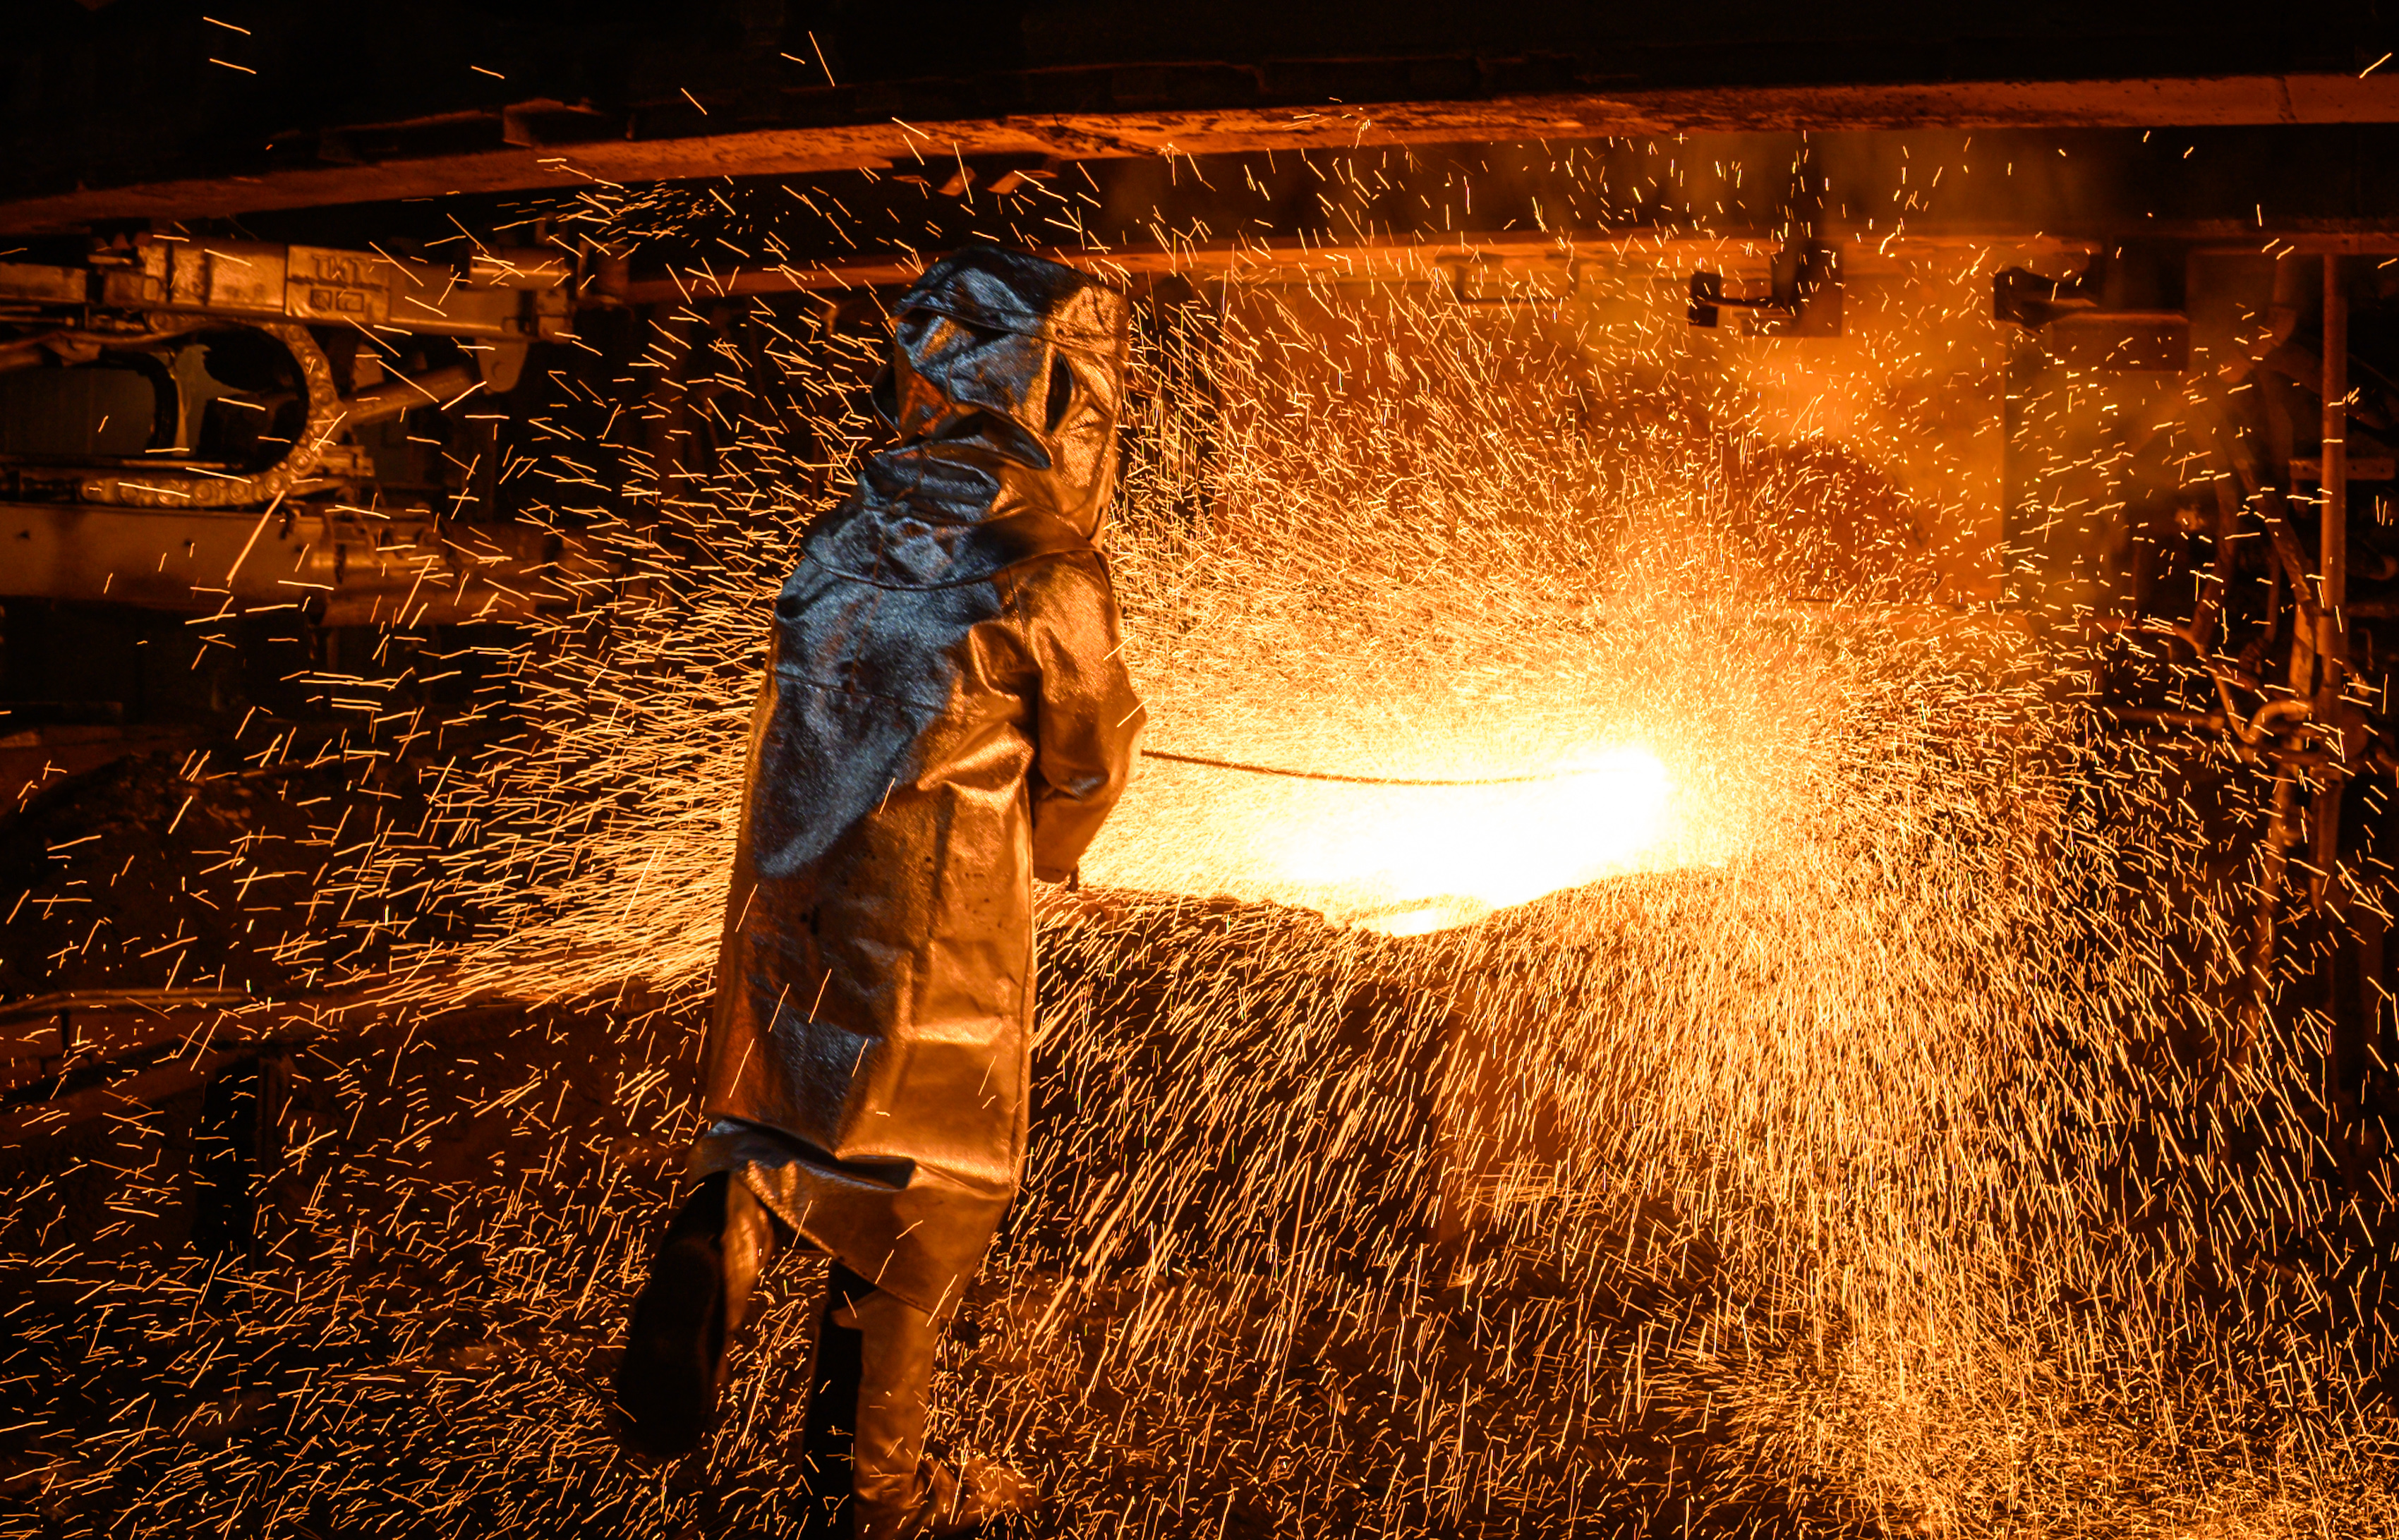 A worker in a fire suit seen supervising the flow of hot liquid metal as it flows from a furnace at the plant. Production of matte nickel at the PT Vale nickel plant, in Sorowako, South sulawesi, Indonesia, the plant is targeting a production of 75,000 metric tons in 2019. (Photo by Hariandi Hafid/SOPA Images/LightRocket via Getty Images)